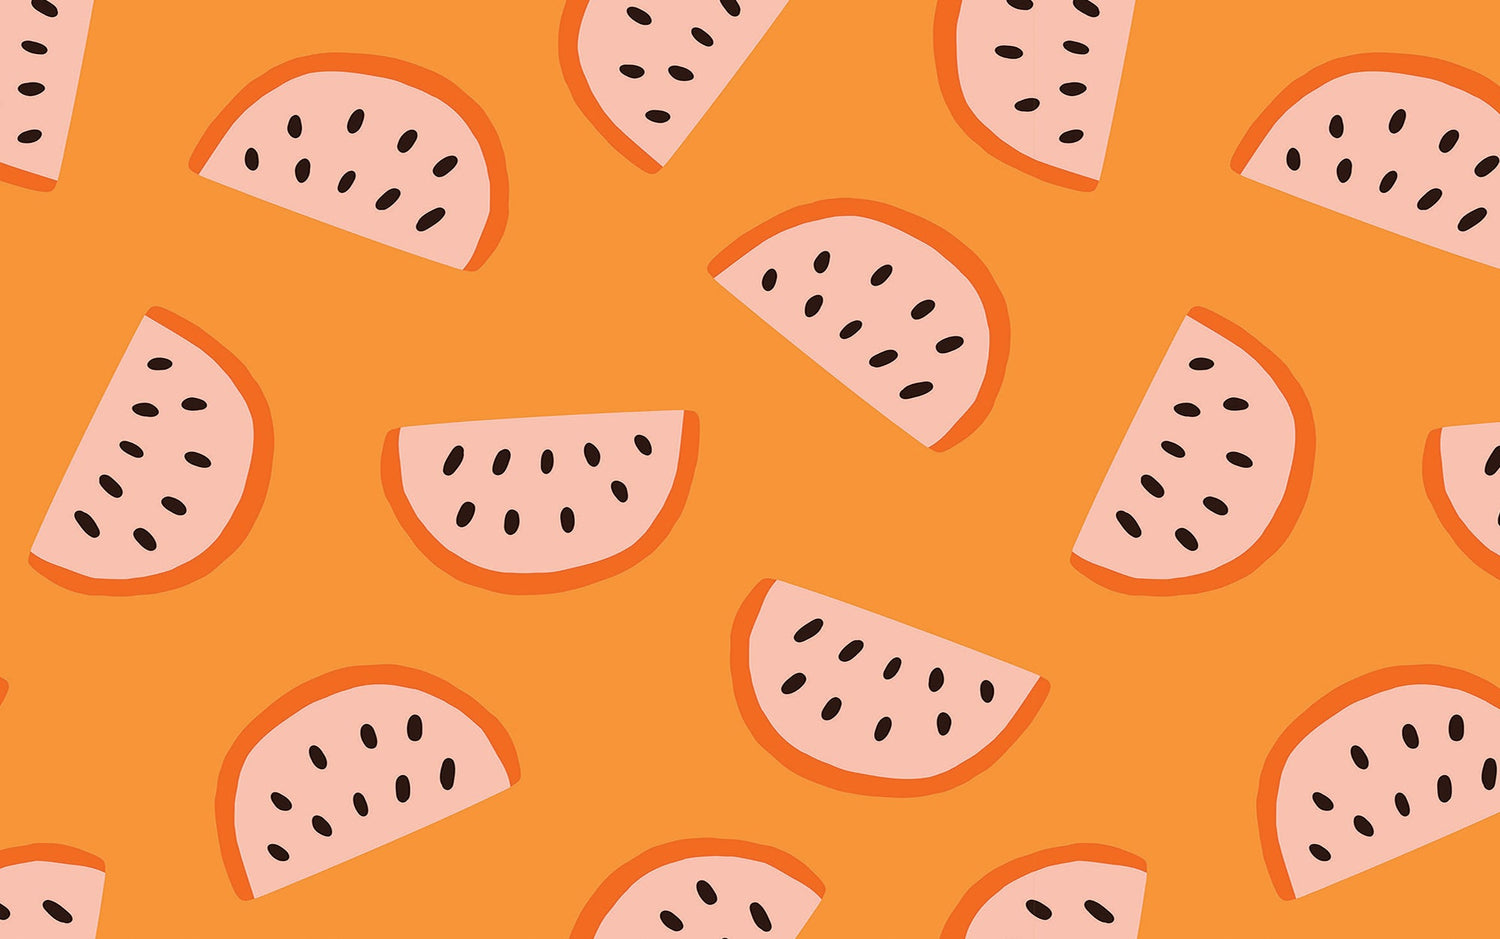 A vibrant orange wall covered with a mural of stylized watermelon slices